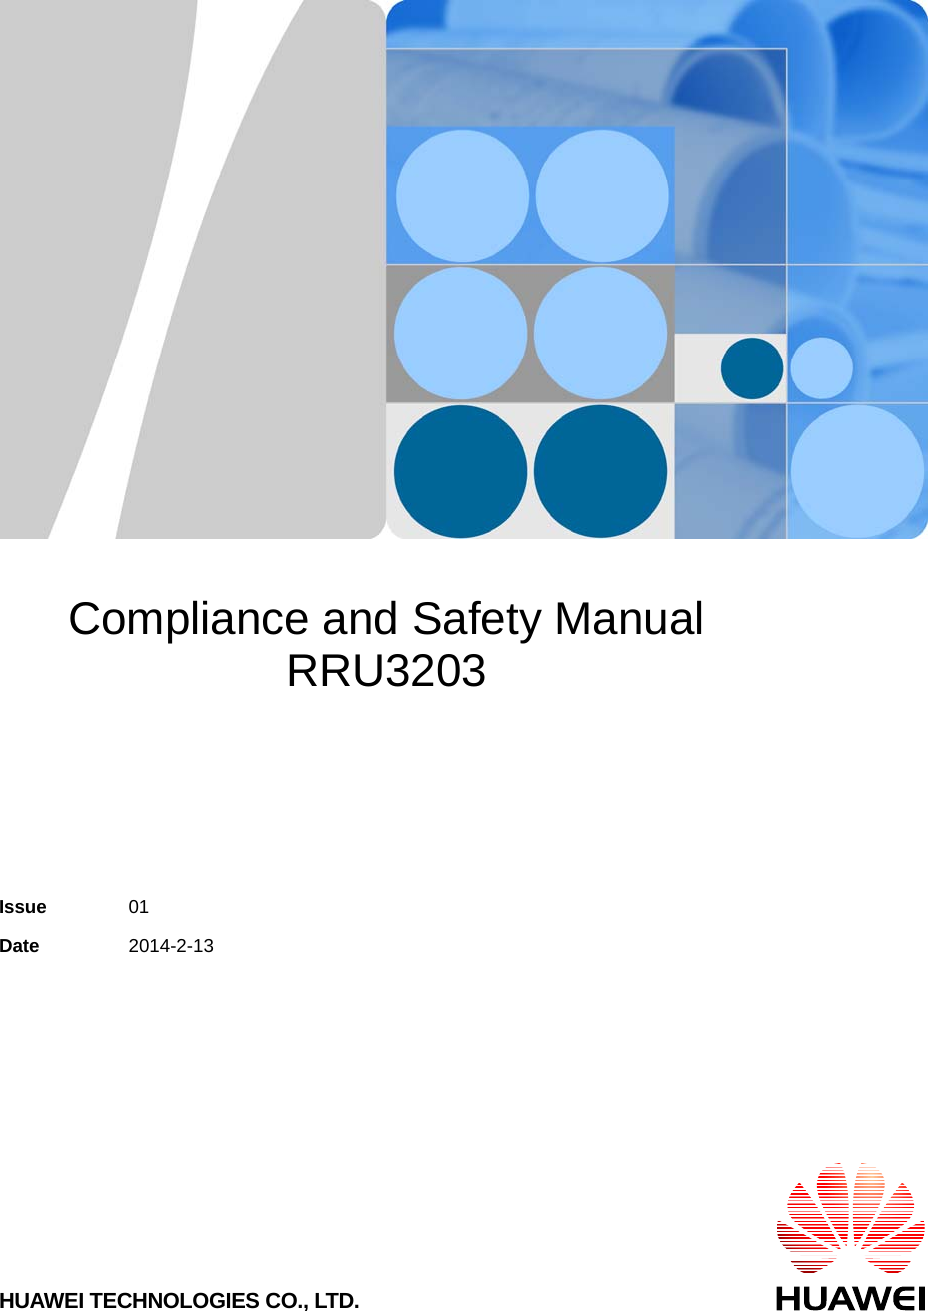       Compliance and Safety Manual RRU3203    Issue  01  Date  2014-2-13 HUAWEI TECHNOLOGIES CO., LTD. 